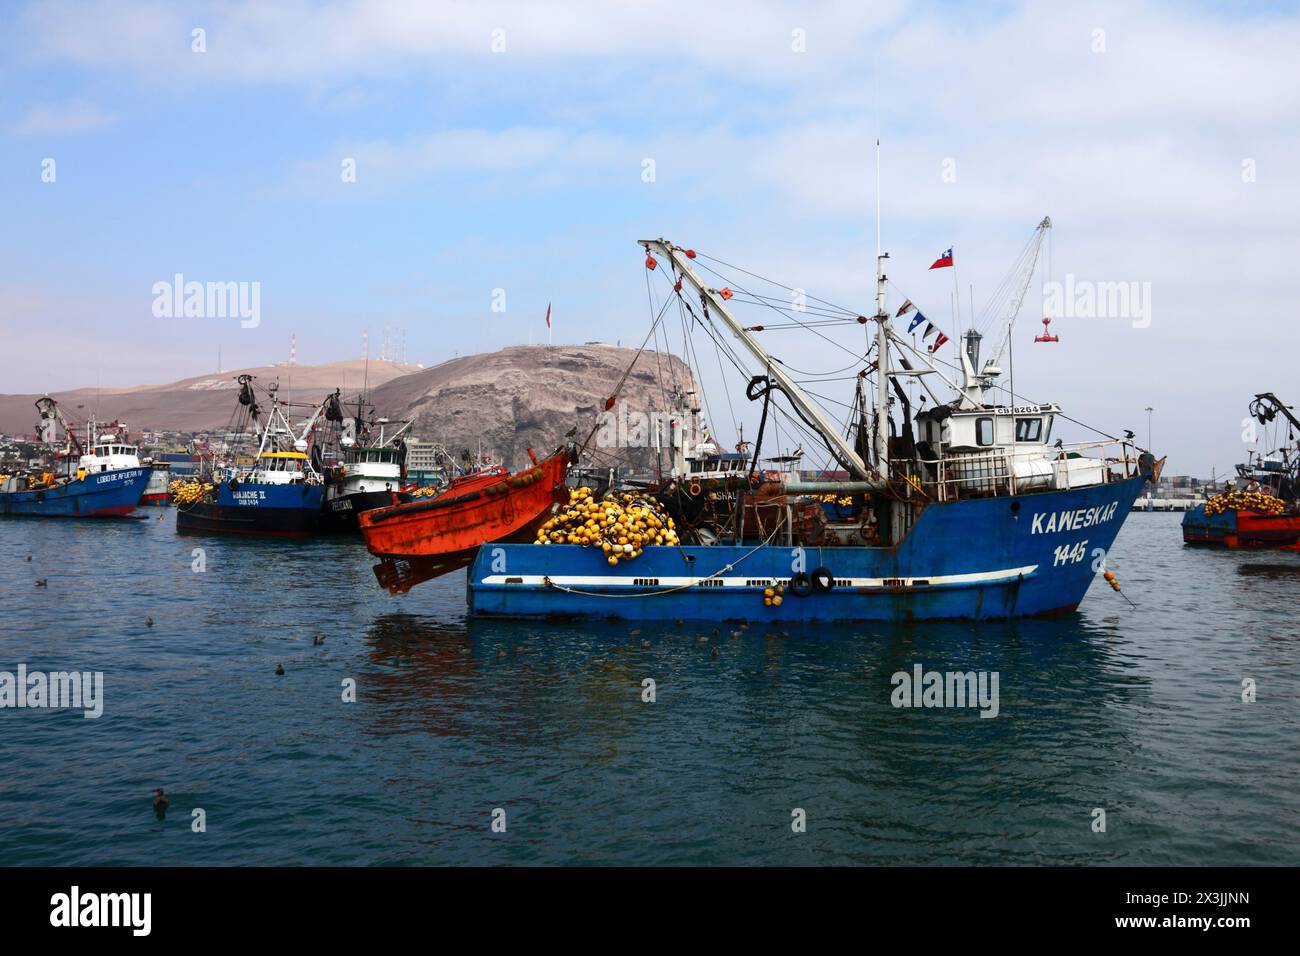 Kaweskar number 1445 fishing trawler laden with equipment moored in port, El Morro headland in background, Arica, Chile Stock Photo